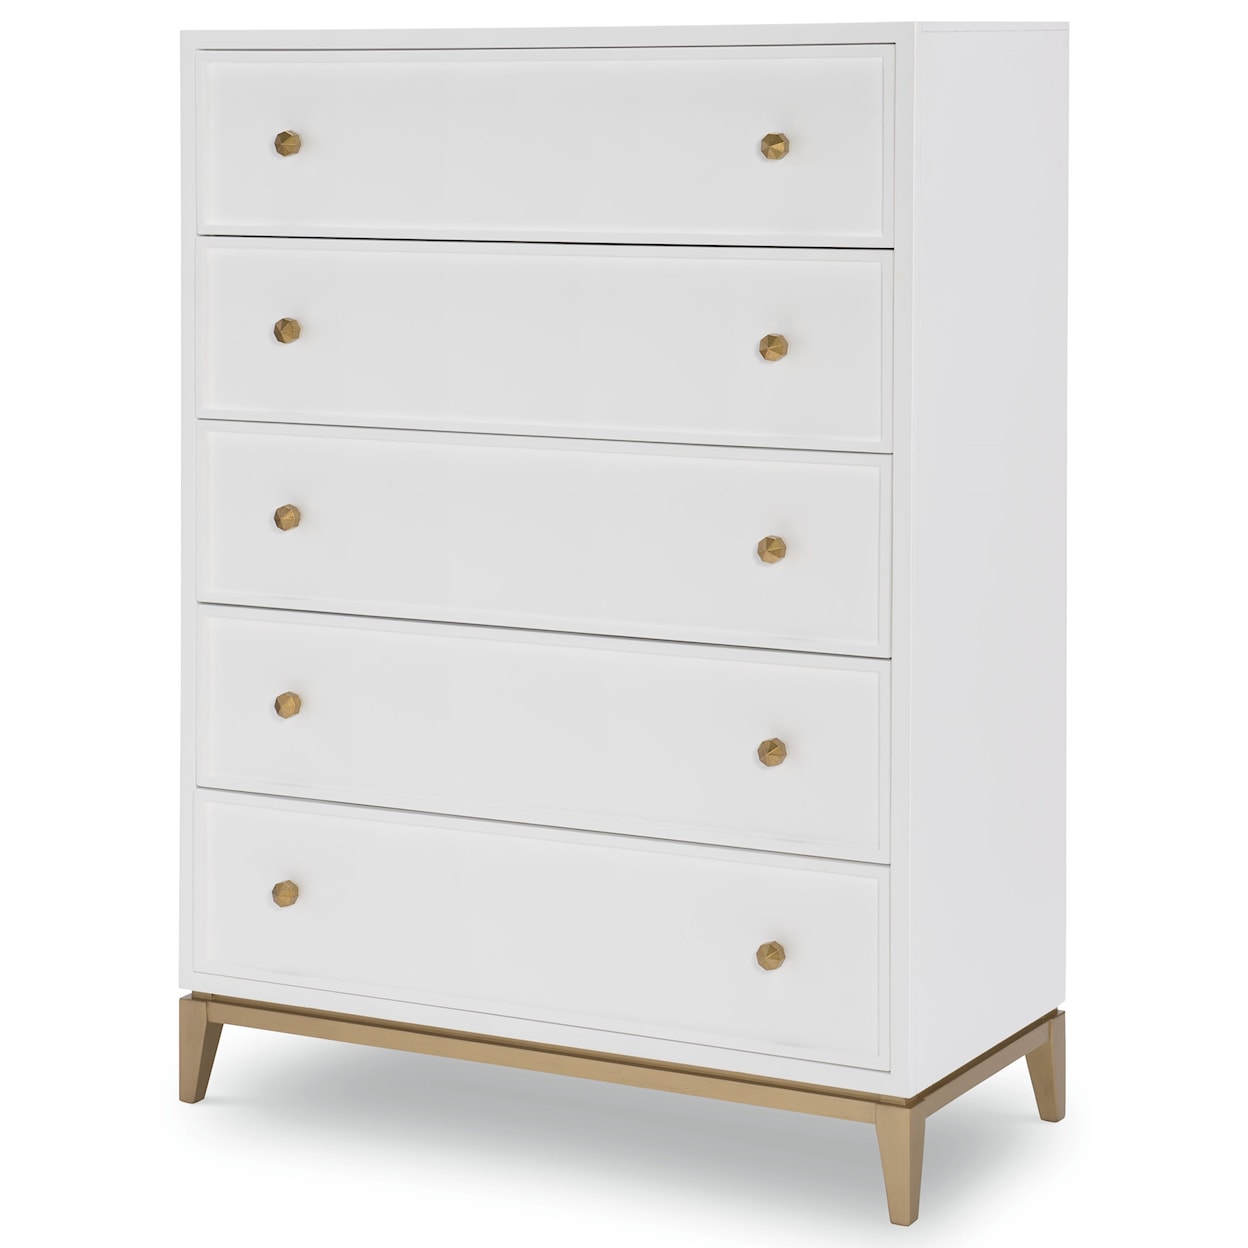 Rachael Ray Home Alexis Drawer Chest